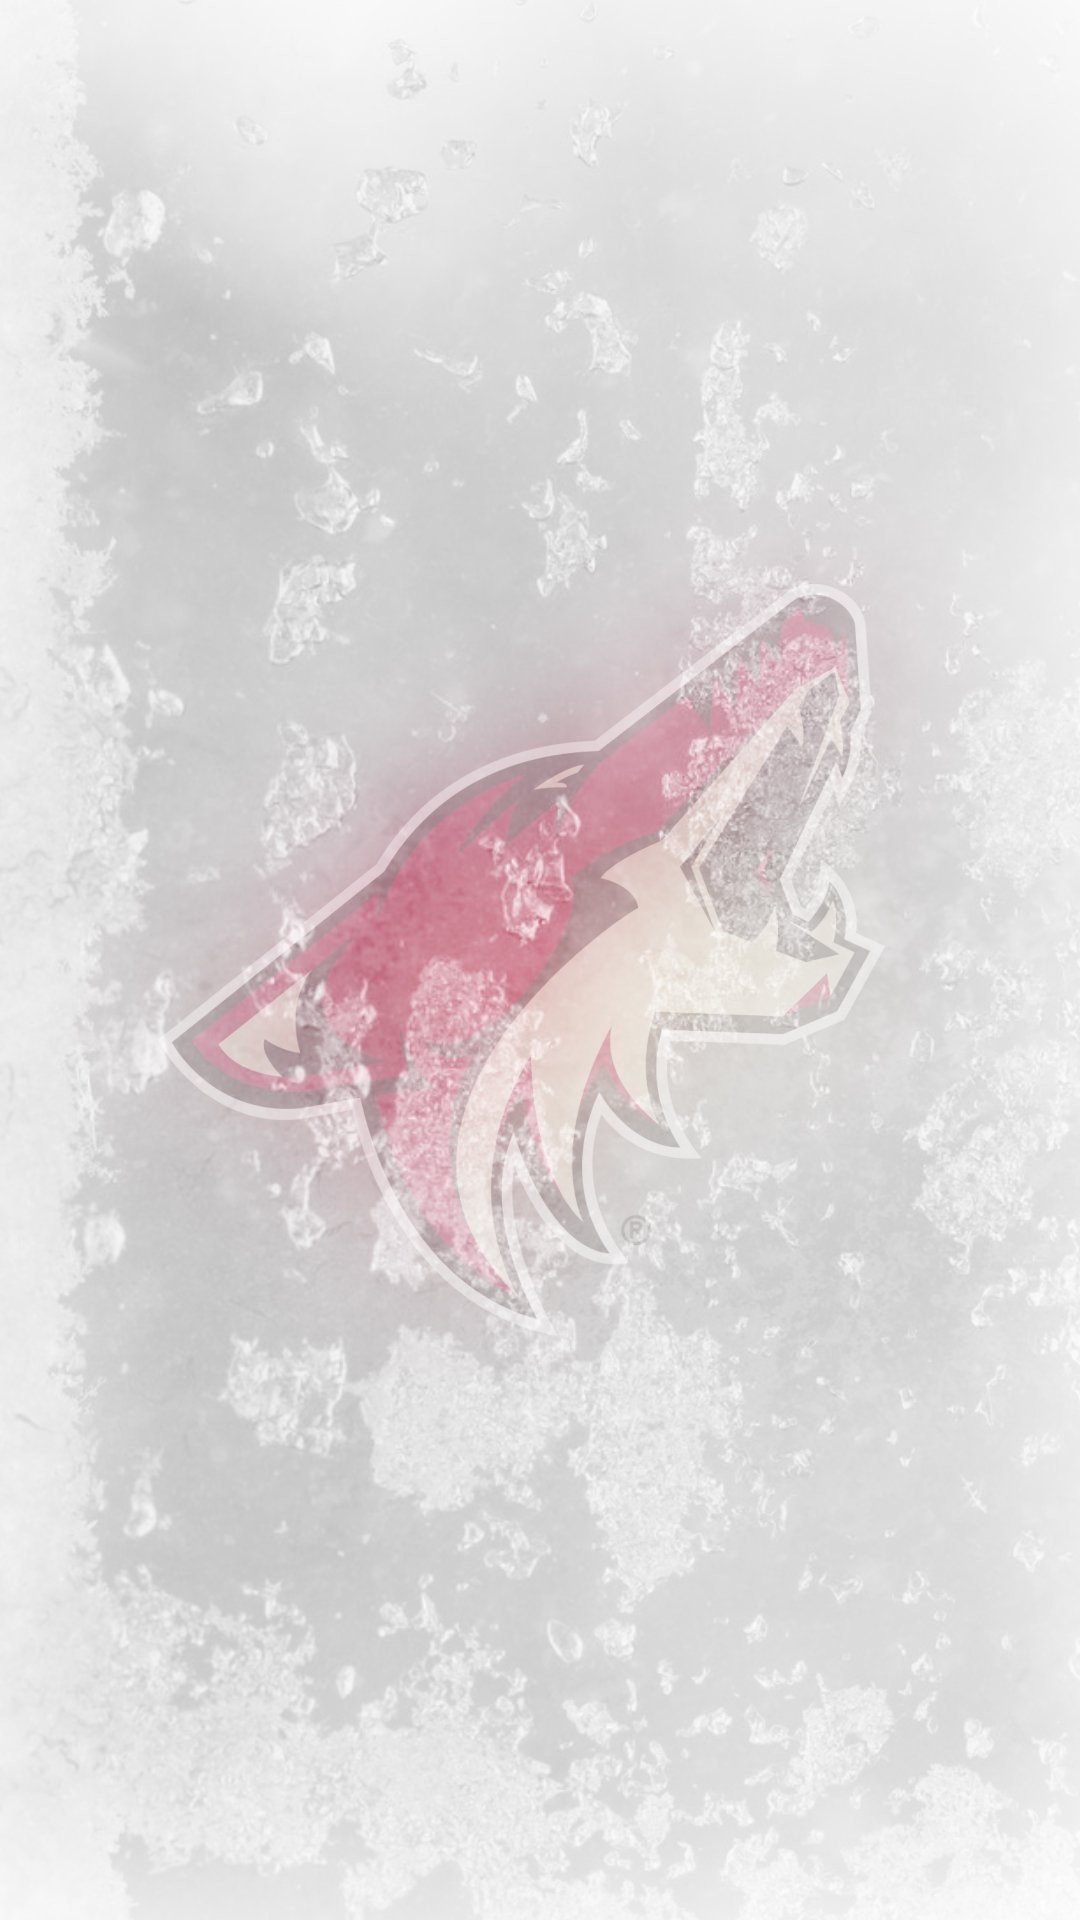 1080x1920 Arizona Coyotes on Twitter: "Looking for new wallpaper? ð± We've got you  covered. #WallpaperWednesday… "